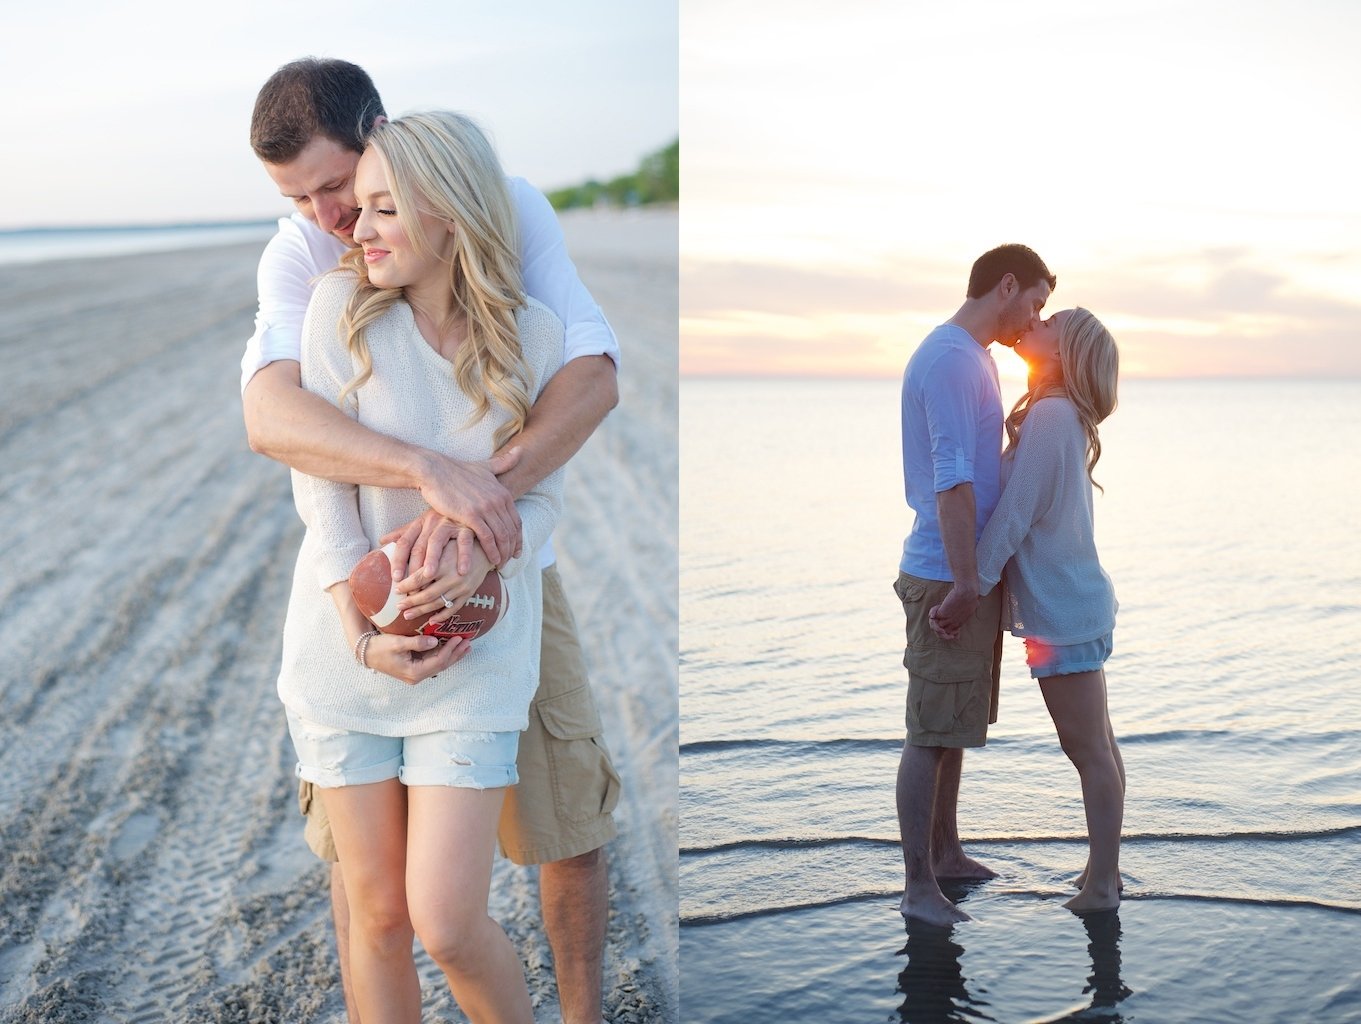 10 Beautiful Engagement Photo Ideas For Summer engagement photo shoot ideas beach google search picture perfect 1 2022